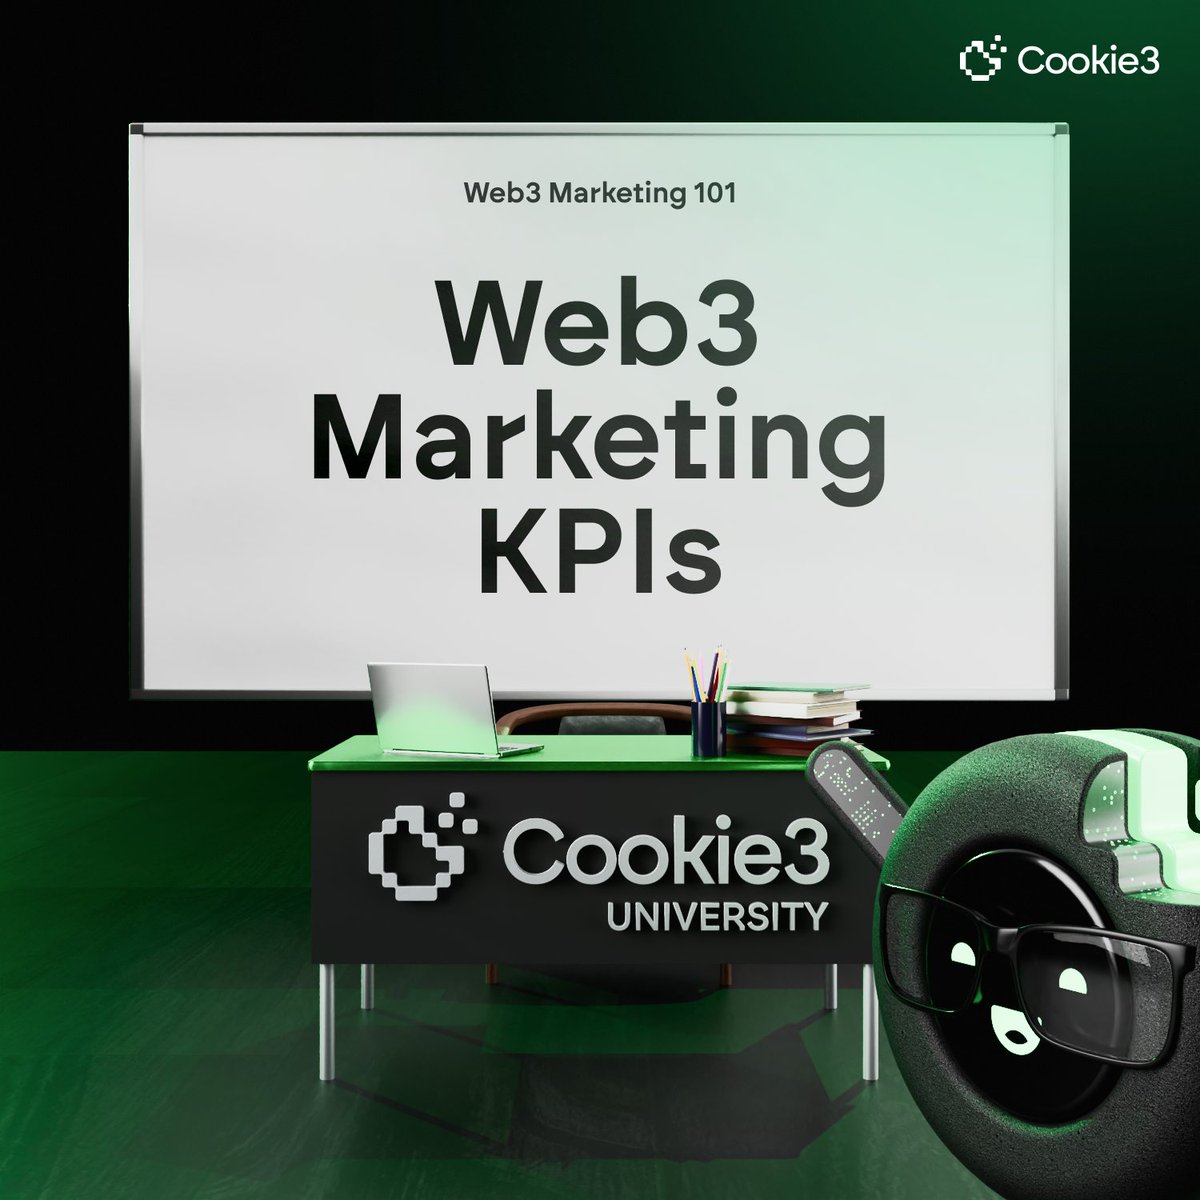 🏫 Lecture: Web 3 Marketing 101
📚 Lesson 1: Web 3 Marketing KPIs 

As Cookie3 builds out the #MarketingFi landscape with an AI Data Layer, Multi-Airdrop Access and a large KOL Hub, we want to empower you with the knowledge you need to navigate Web3 marketing! 🍪

We're kicking…